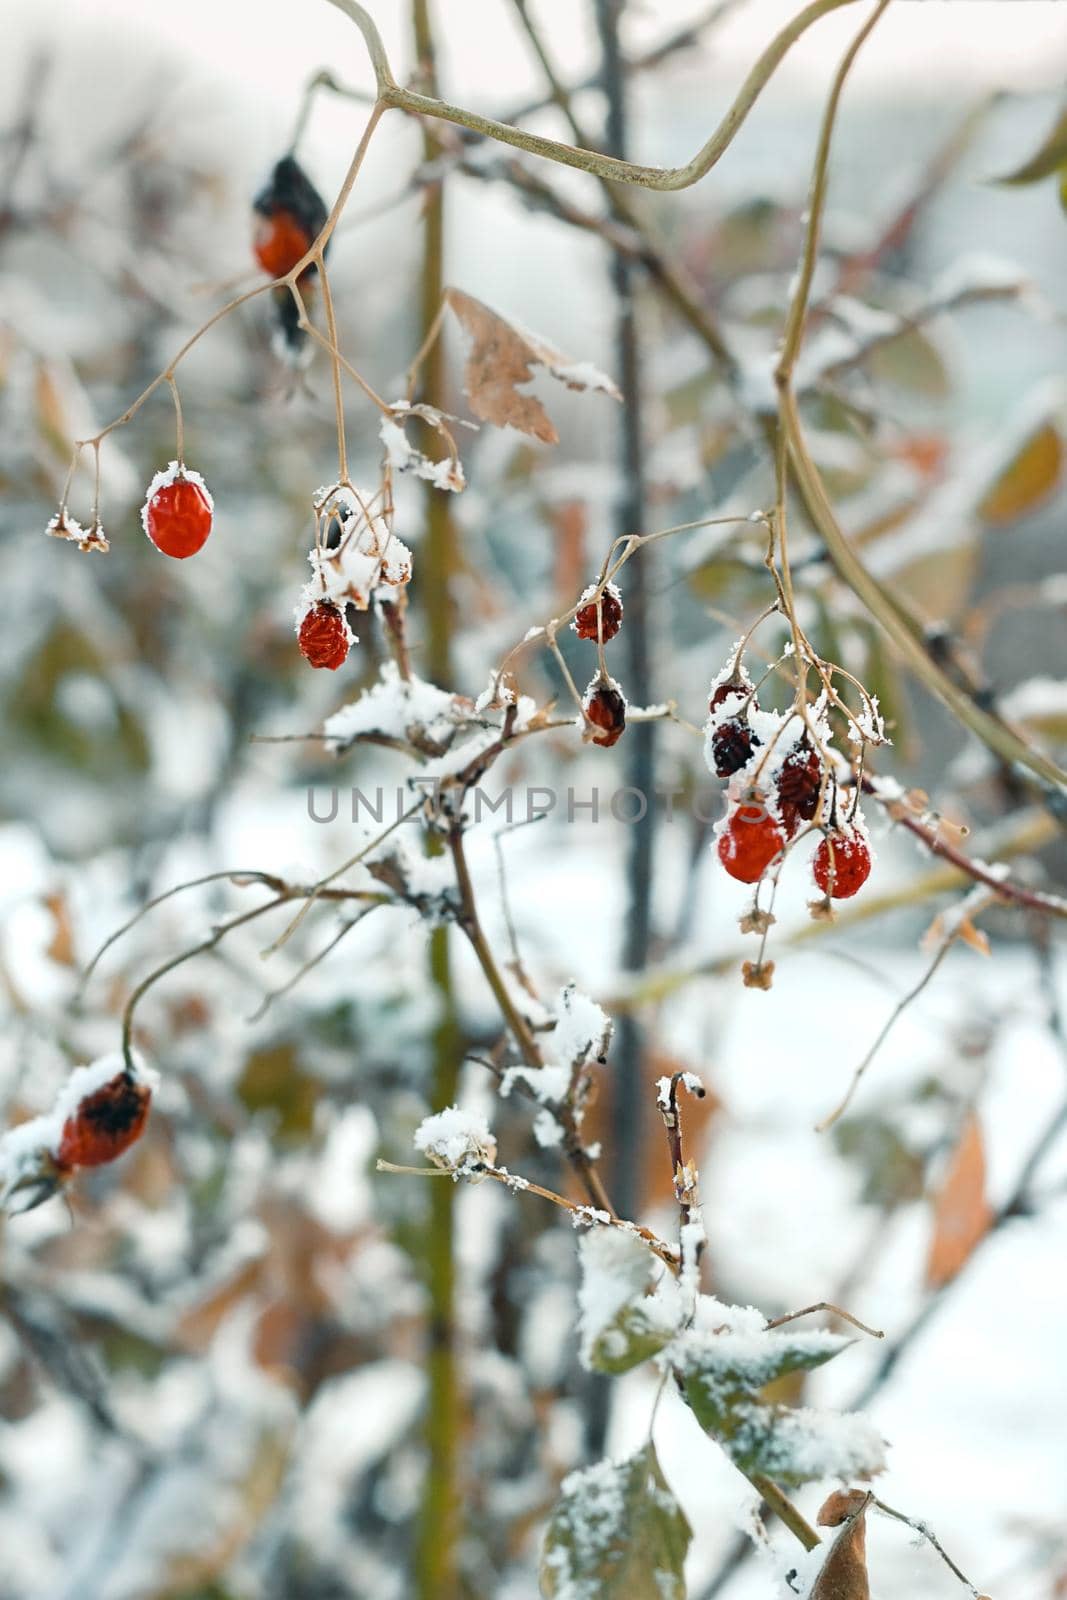 Closeup red frozen berries on faded bushes with first snow, snowy landscape, natural wintry atmospheric background, winter season onset concept, vertical image